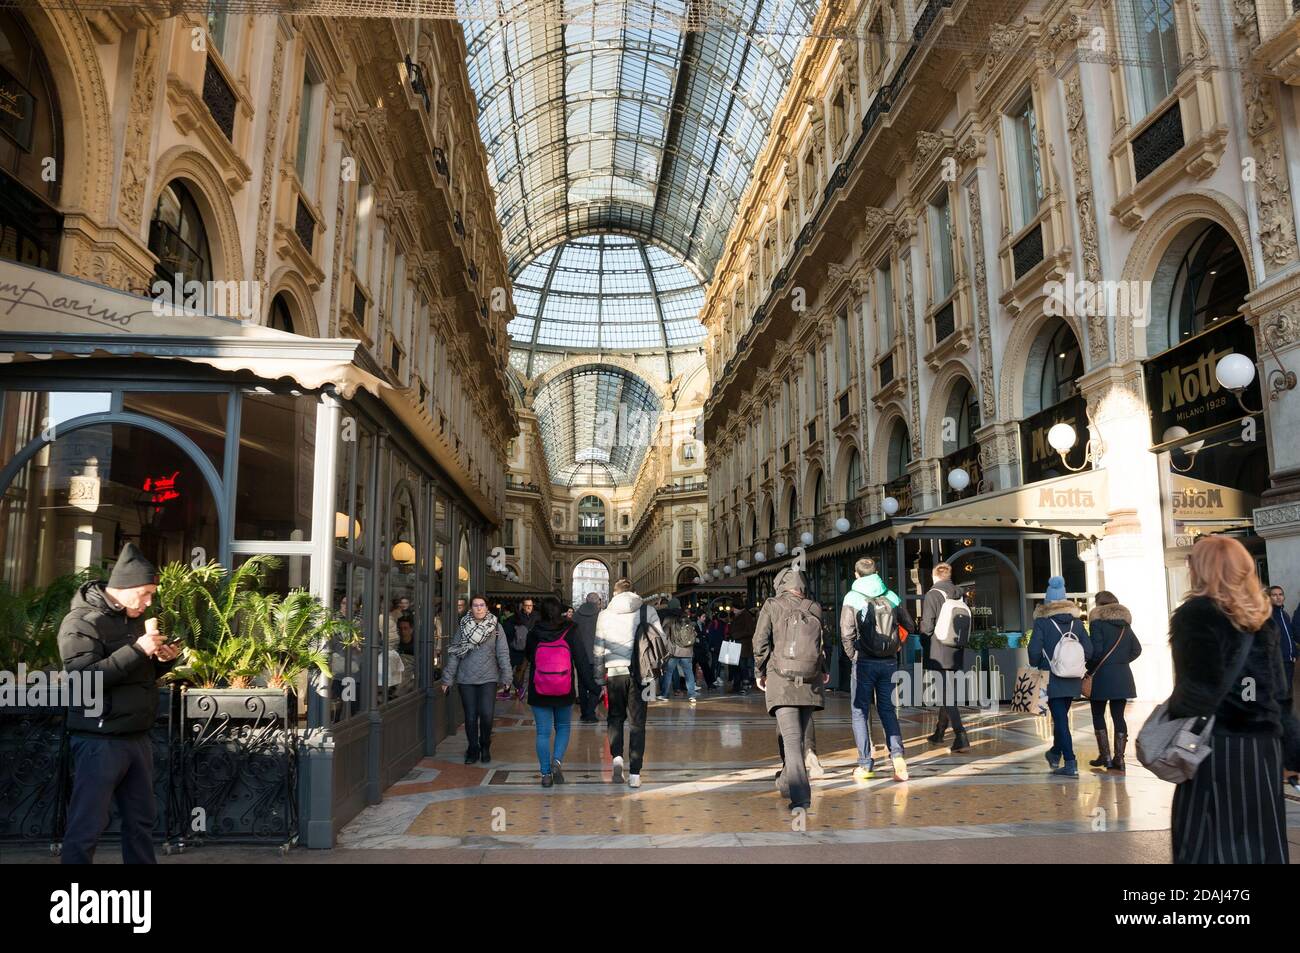 People walk through the Vittorio Emanuele II Gallery - a unique indoor shopping gallery in the center of Milan, built in 1865-1877. Italy. Stock Photo